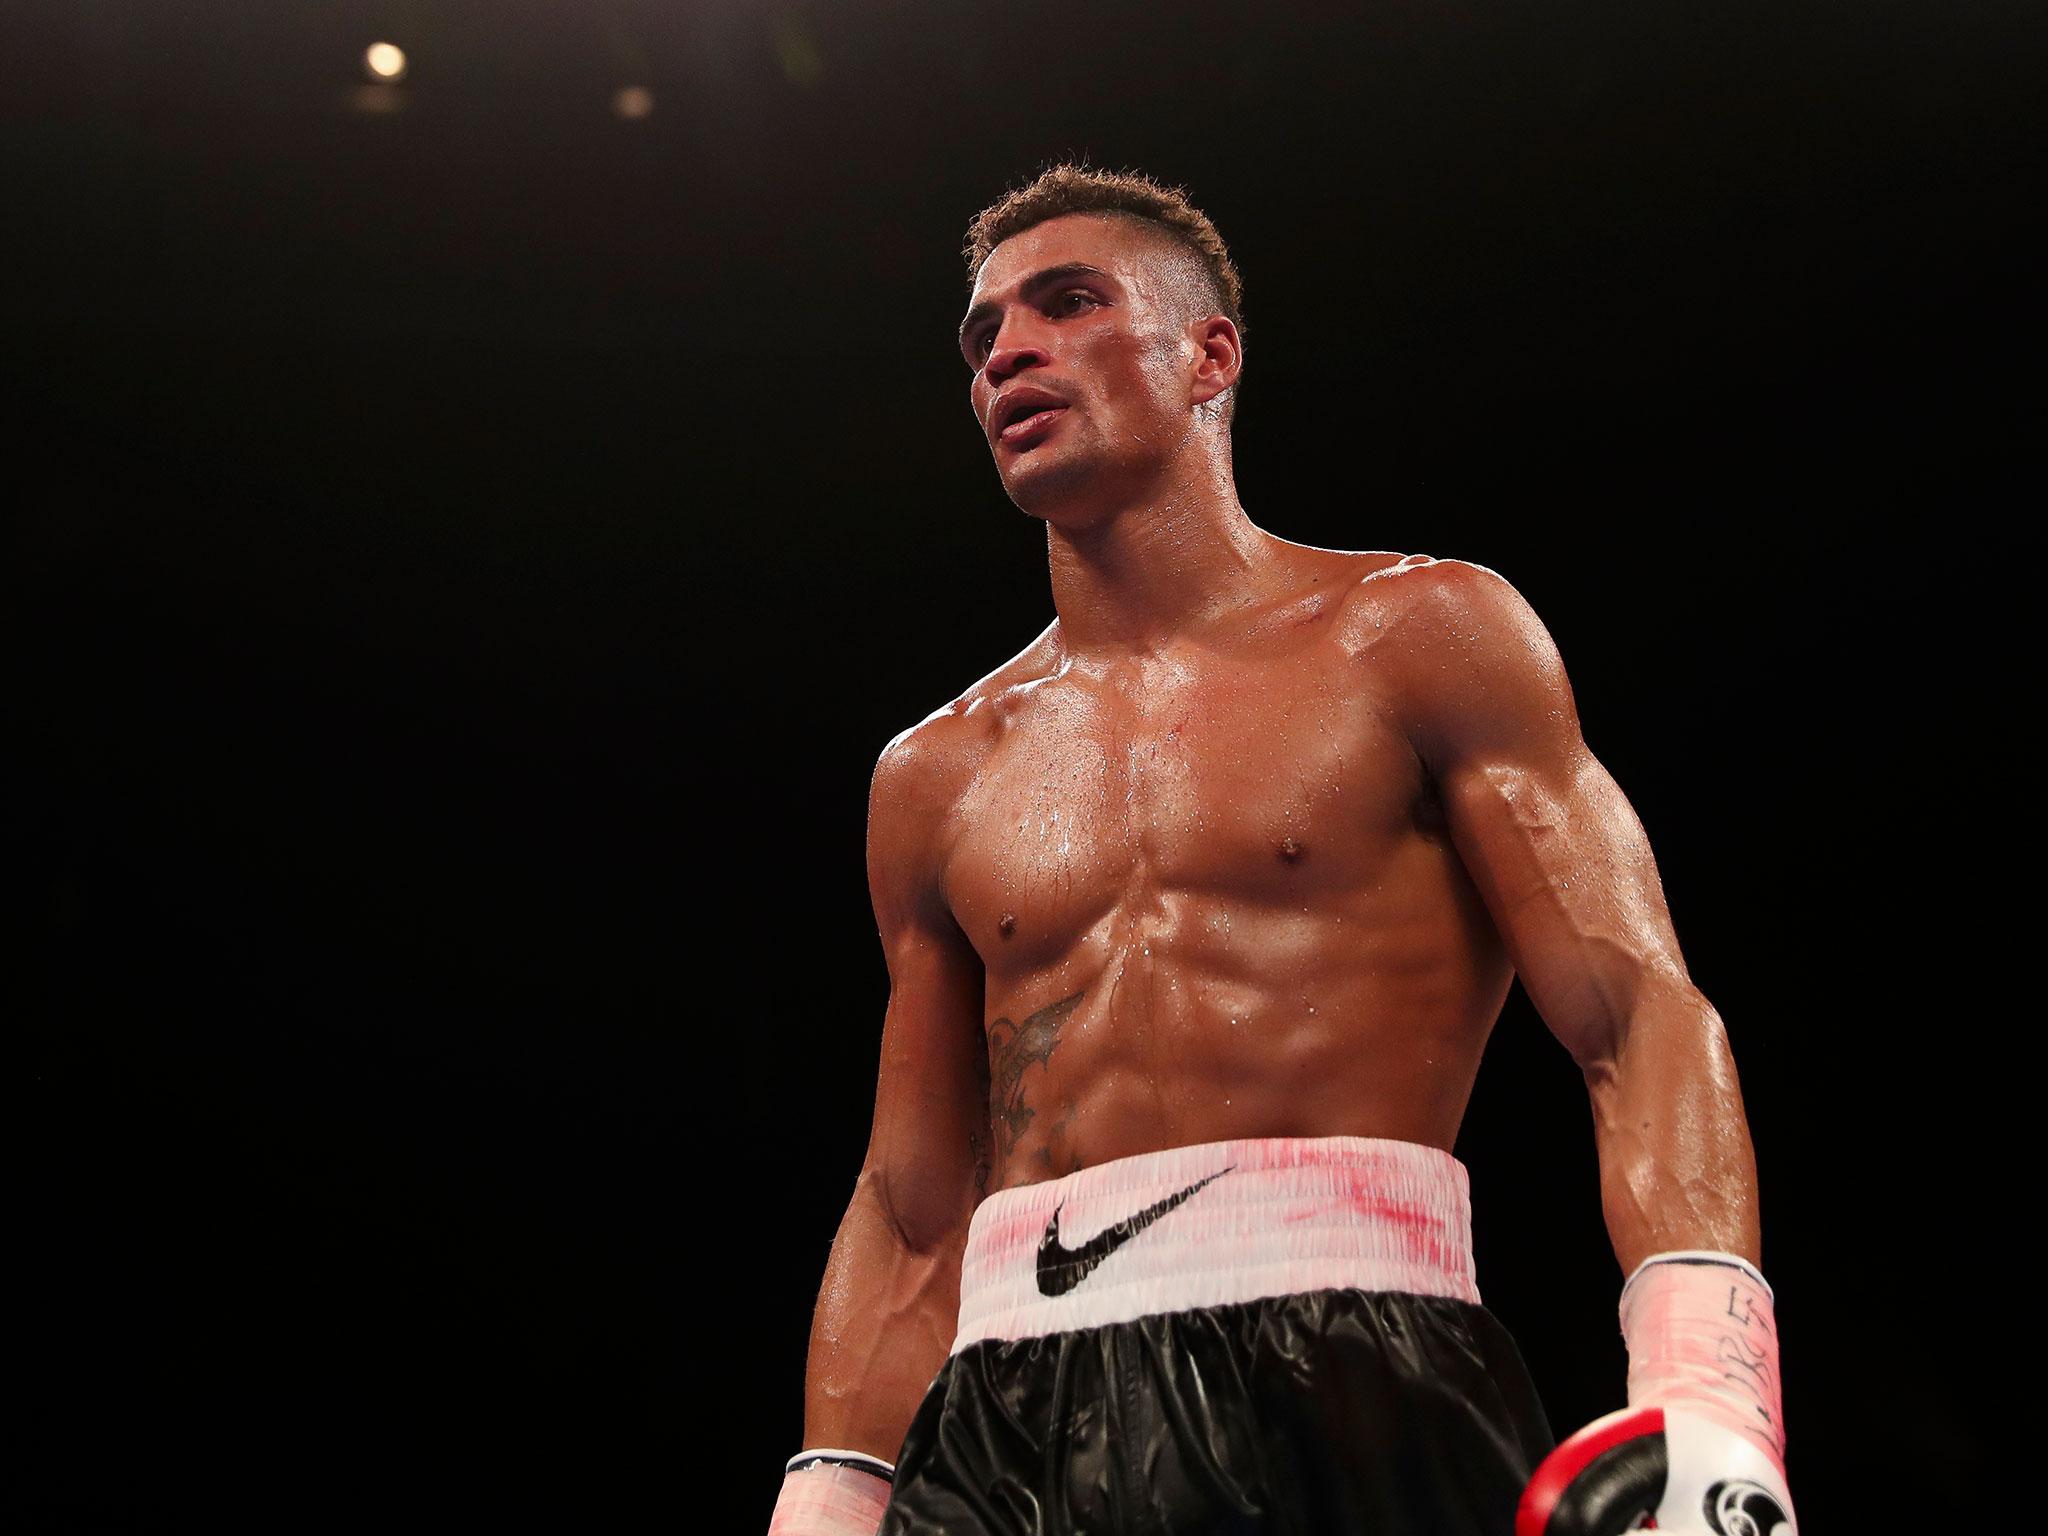 Ogogo made the allegations in a series of posts on social media